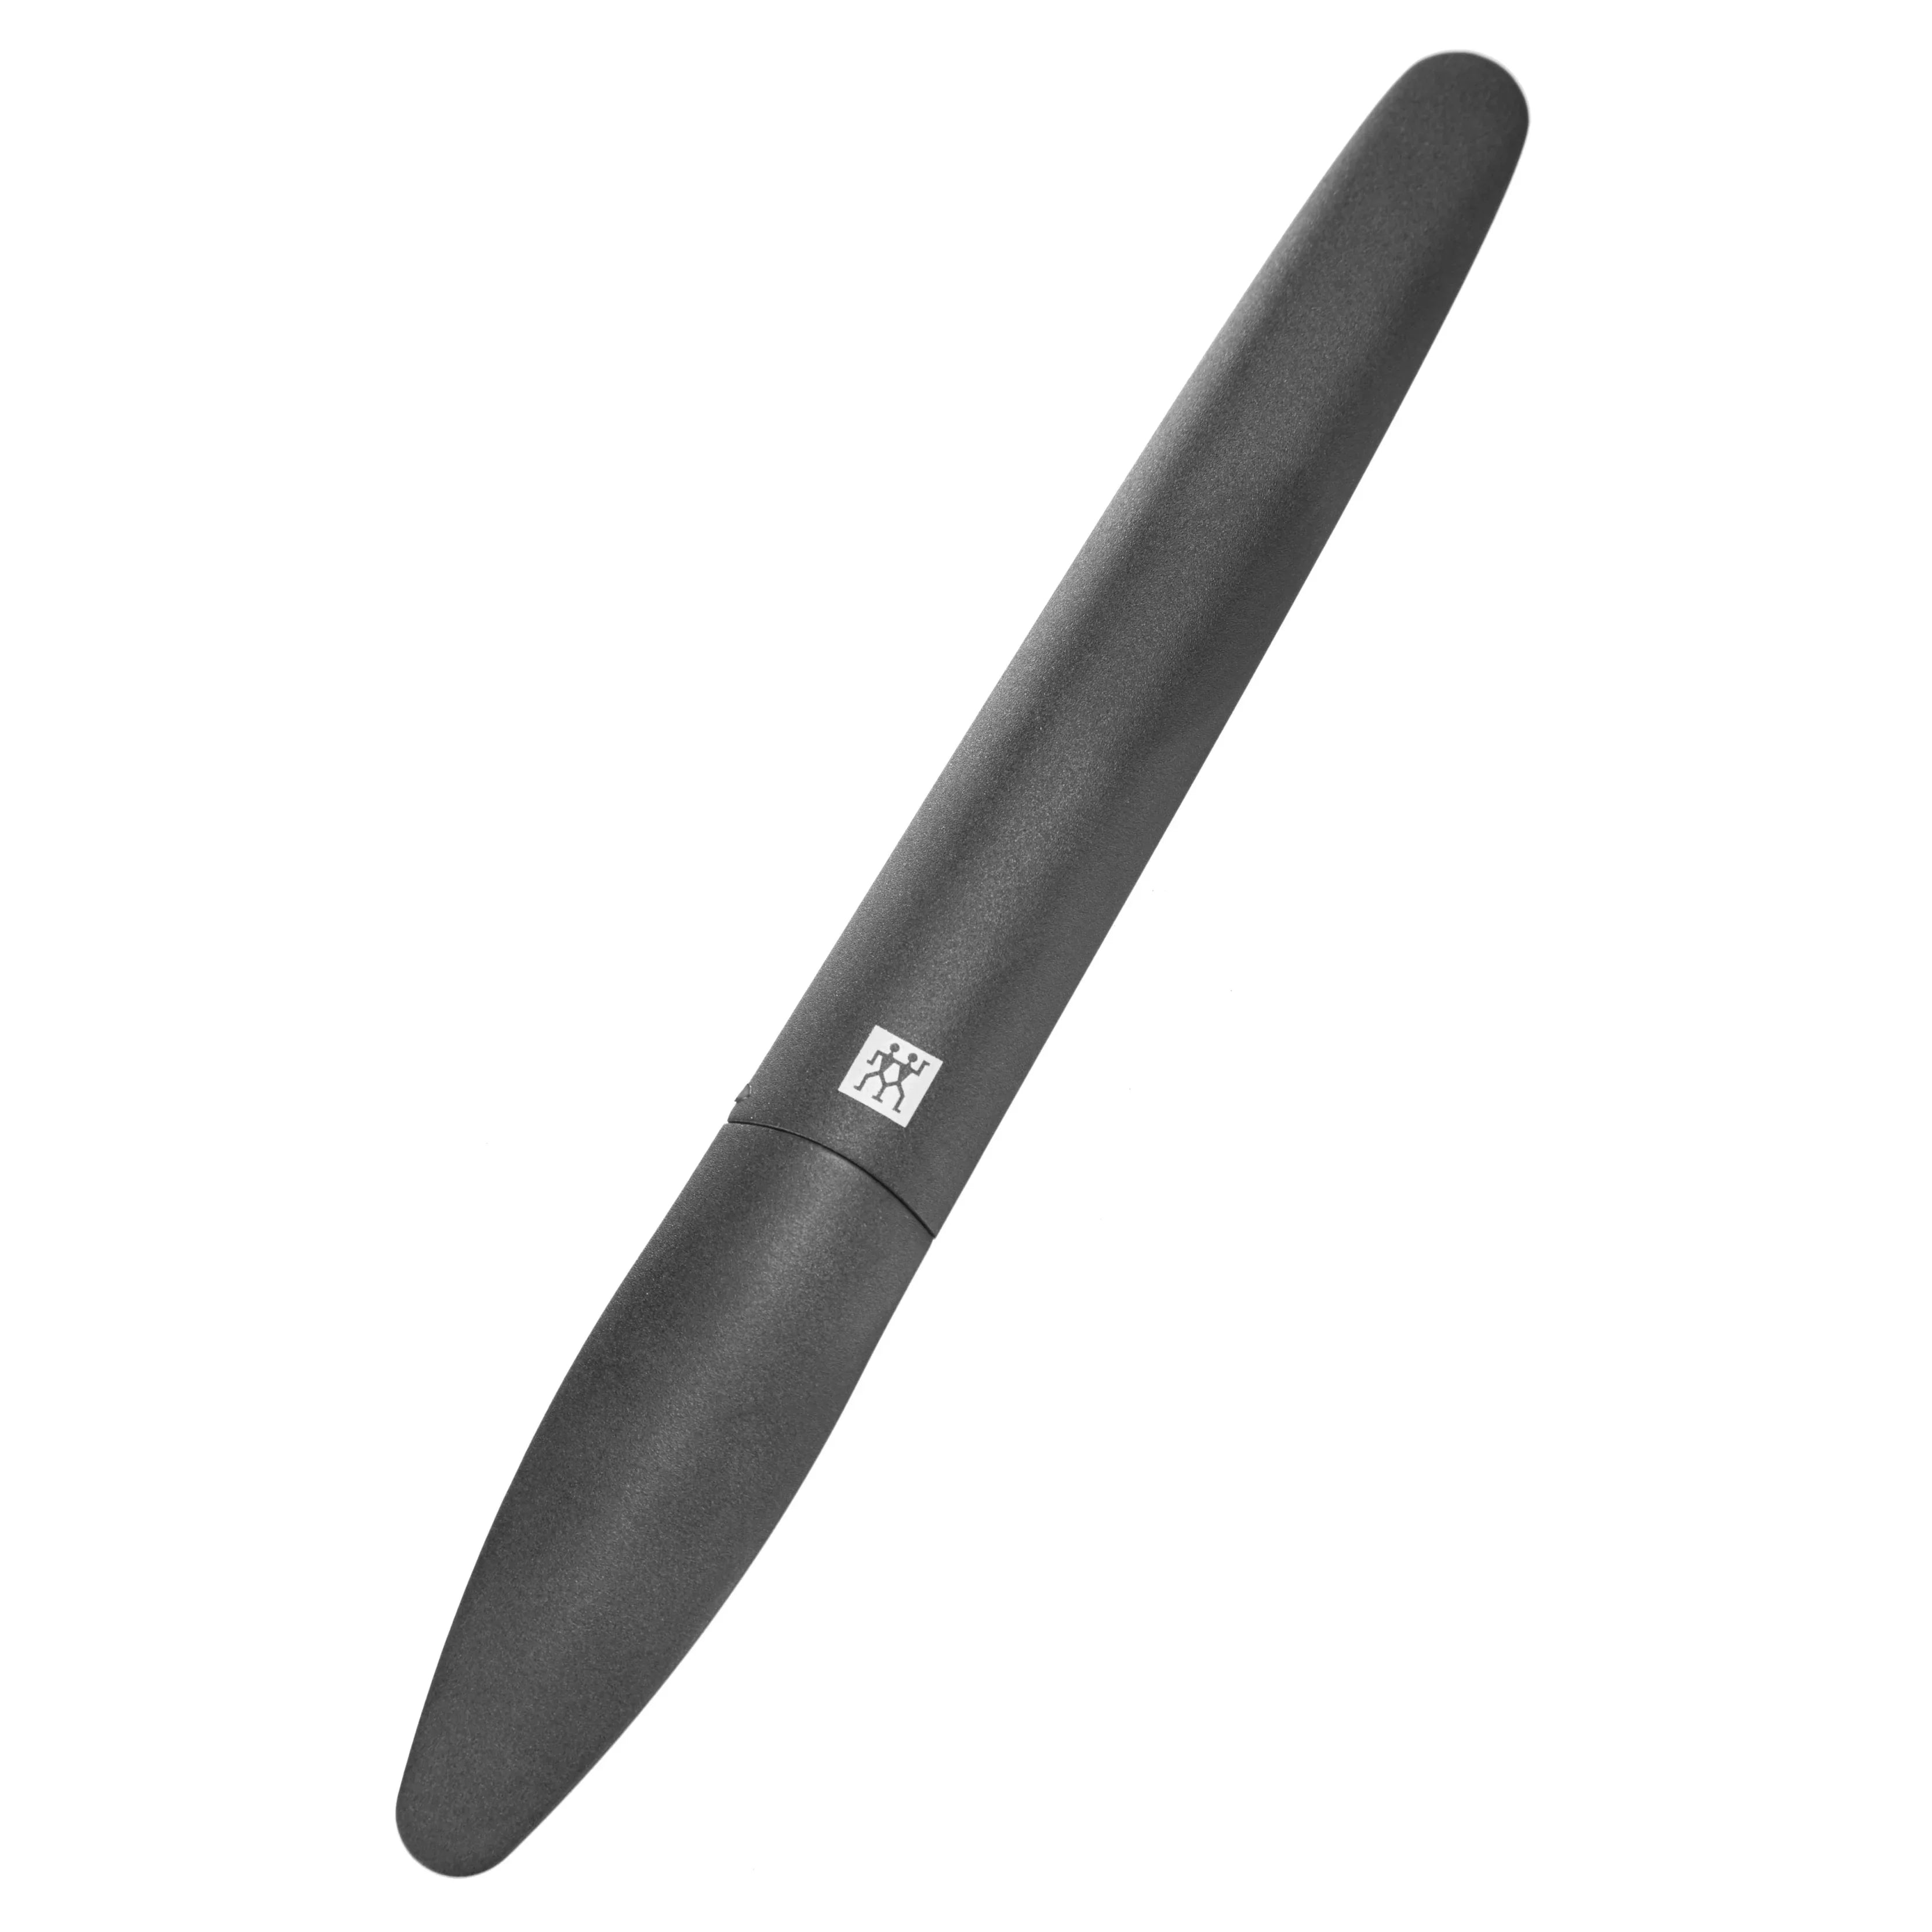 Zwilling Ceramic nail file 16 cm - silver polished